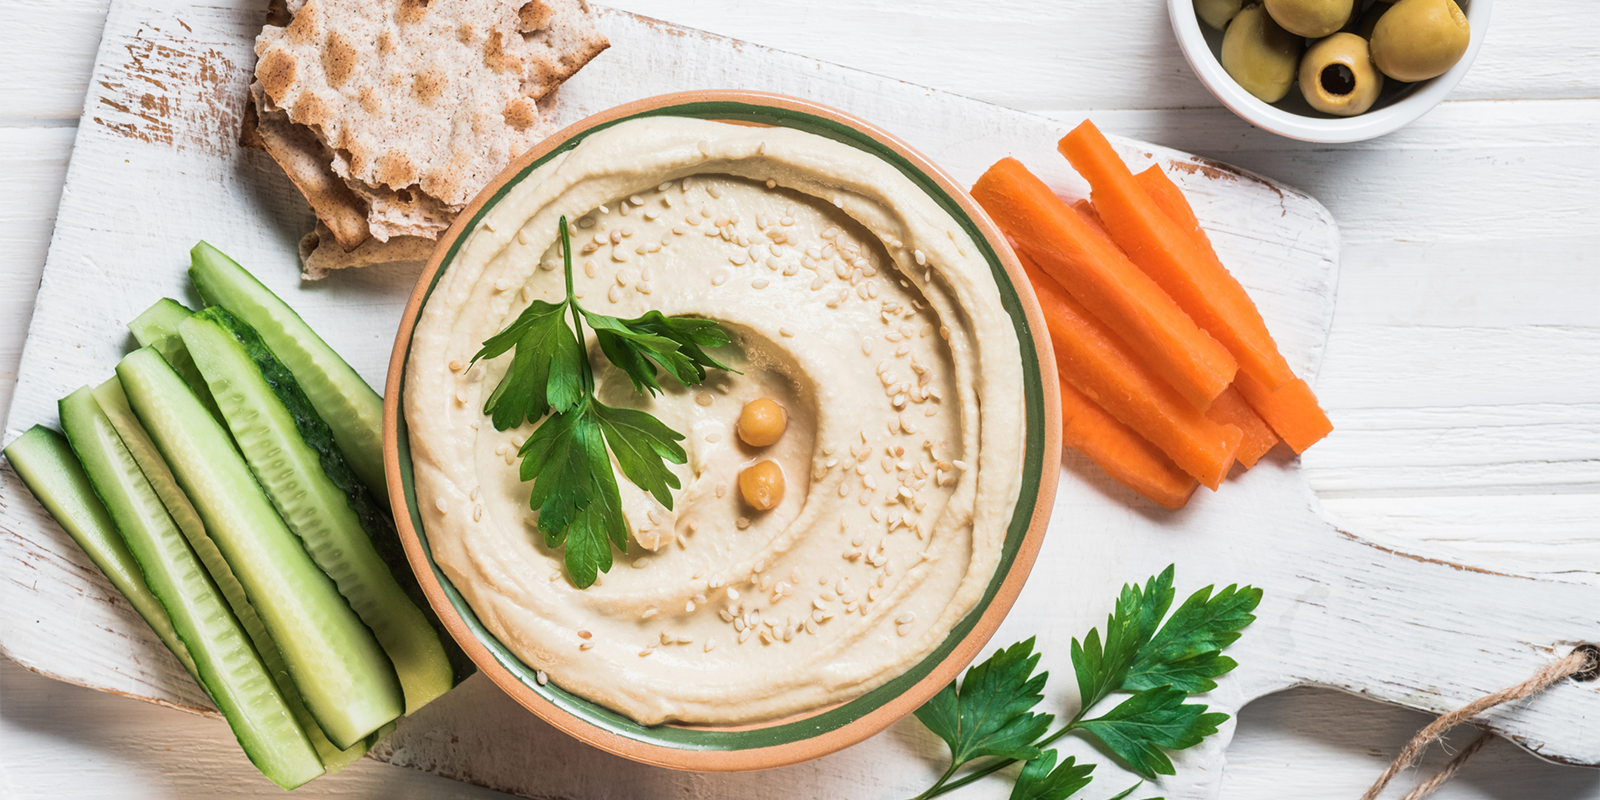 A bowl of hummus with veggies, olives and pita bread